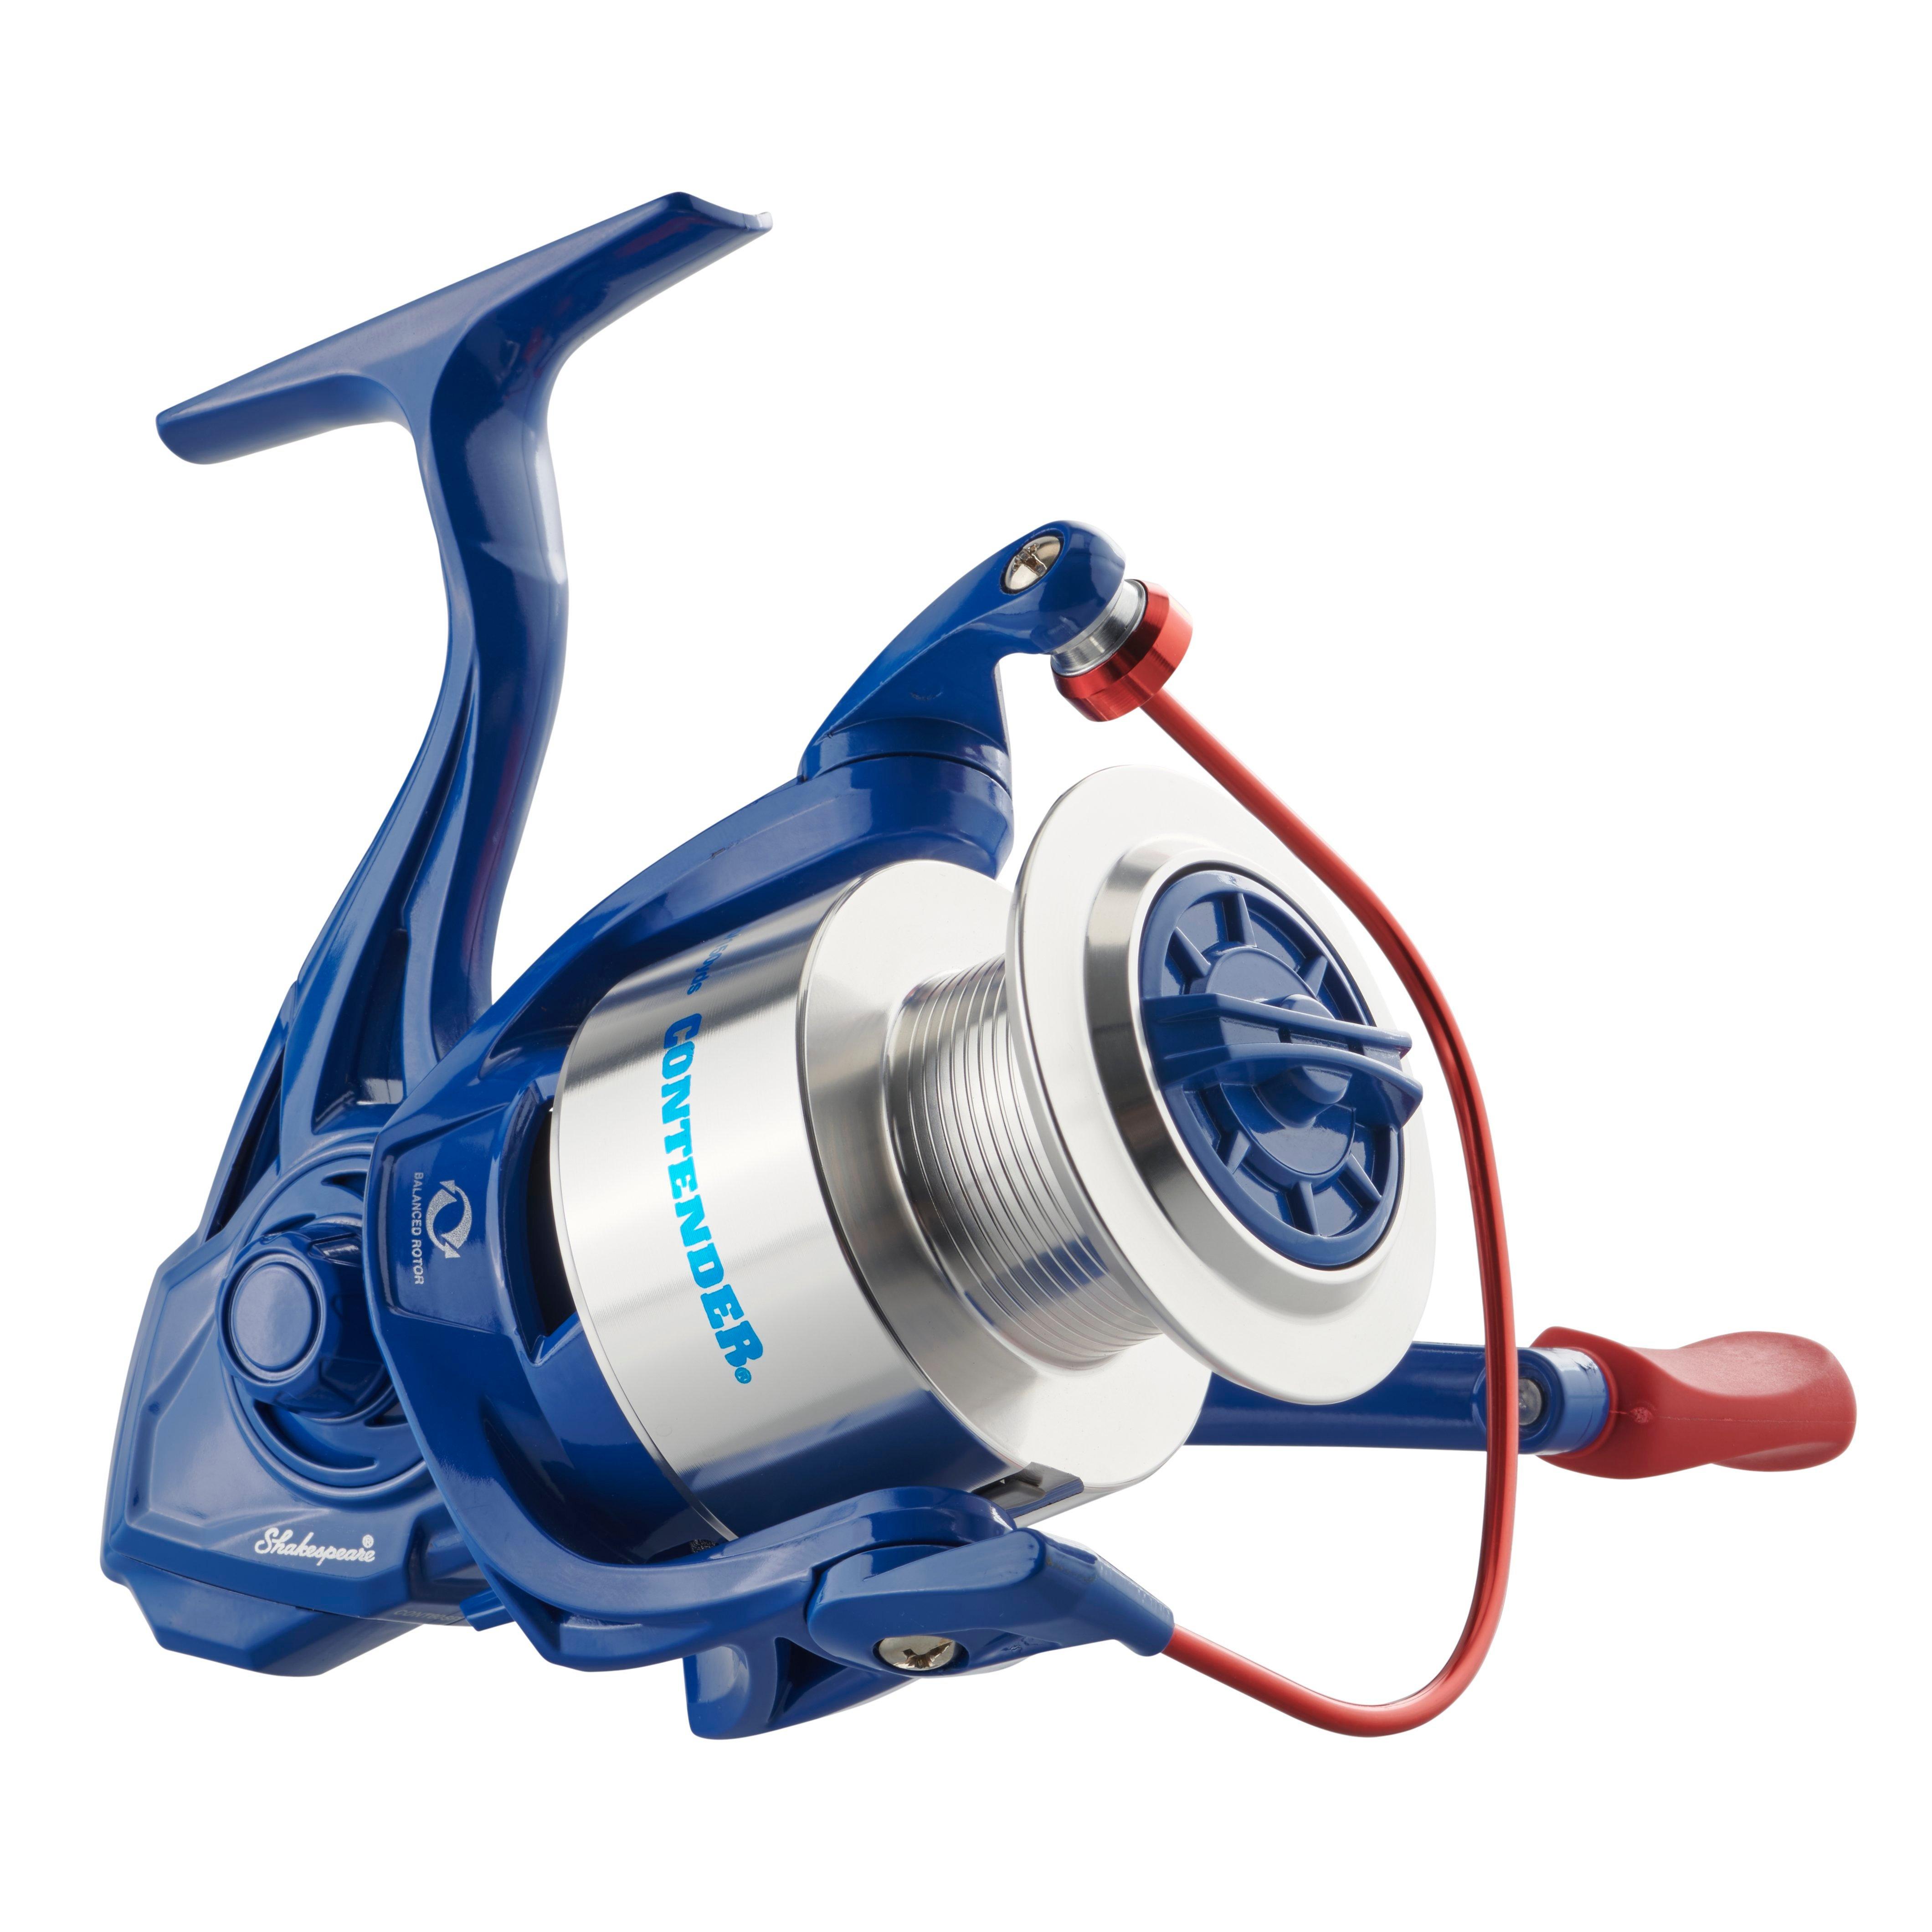 Cadence Ideal Spinning Reel, Super Smooth Fishing Reel with 10 + 1 BB for  Freshwater, Durable and Powerful Reel with 30LBs Max Drag & 6.2:1, Great